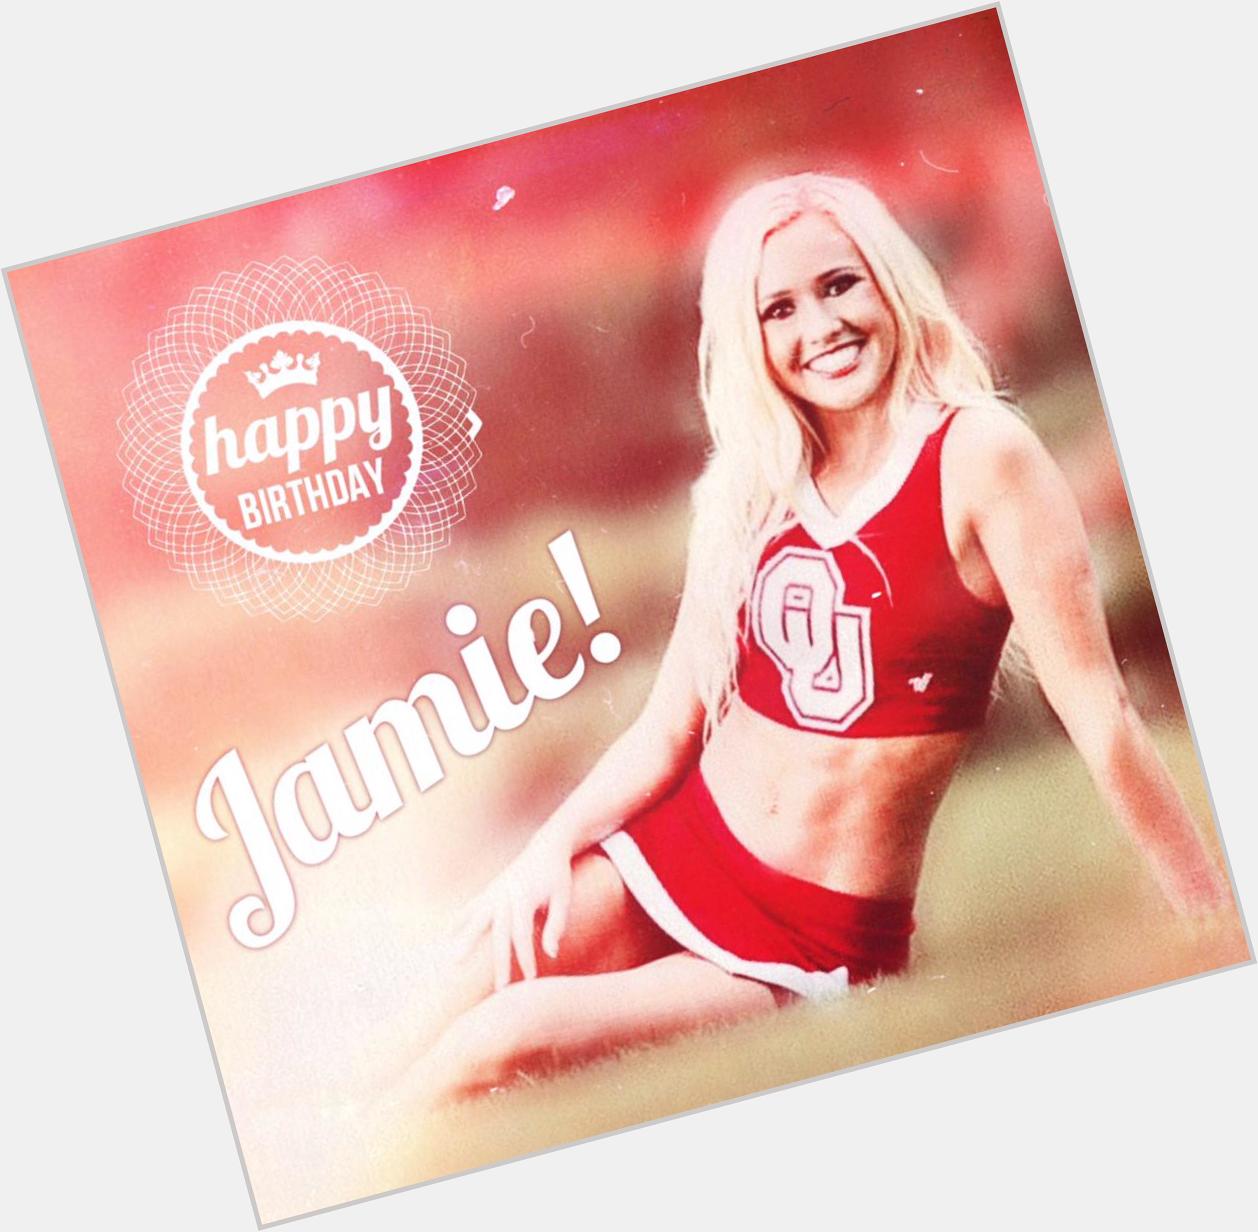 Happy birthday to THE Jamie Andries! She\s definitely going to make us CA supporters proud at OU   